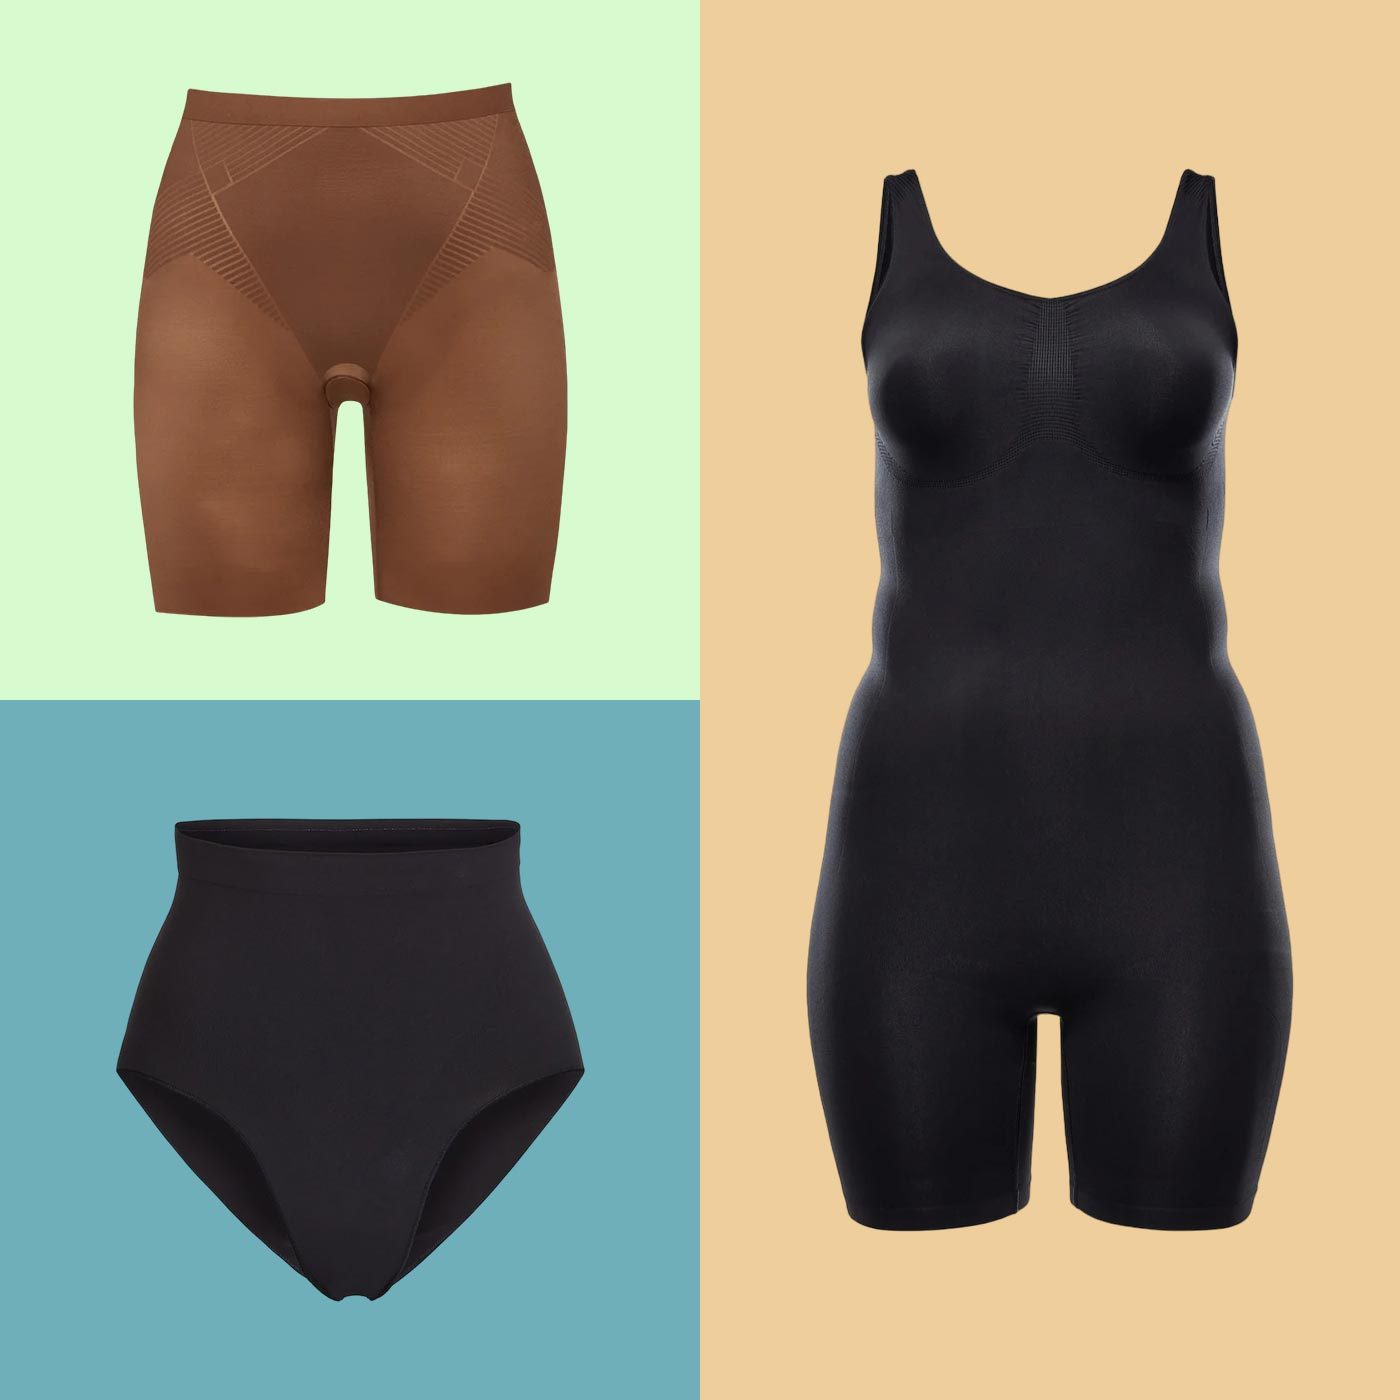 The Best Shapewear for Every Type of Dress